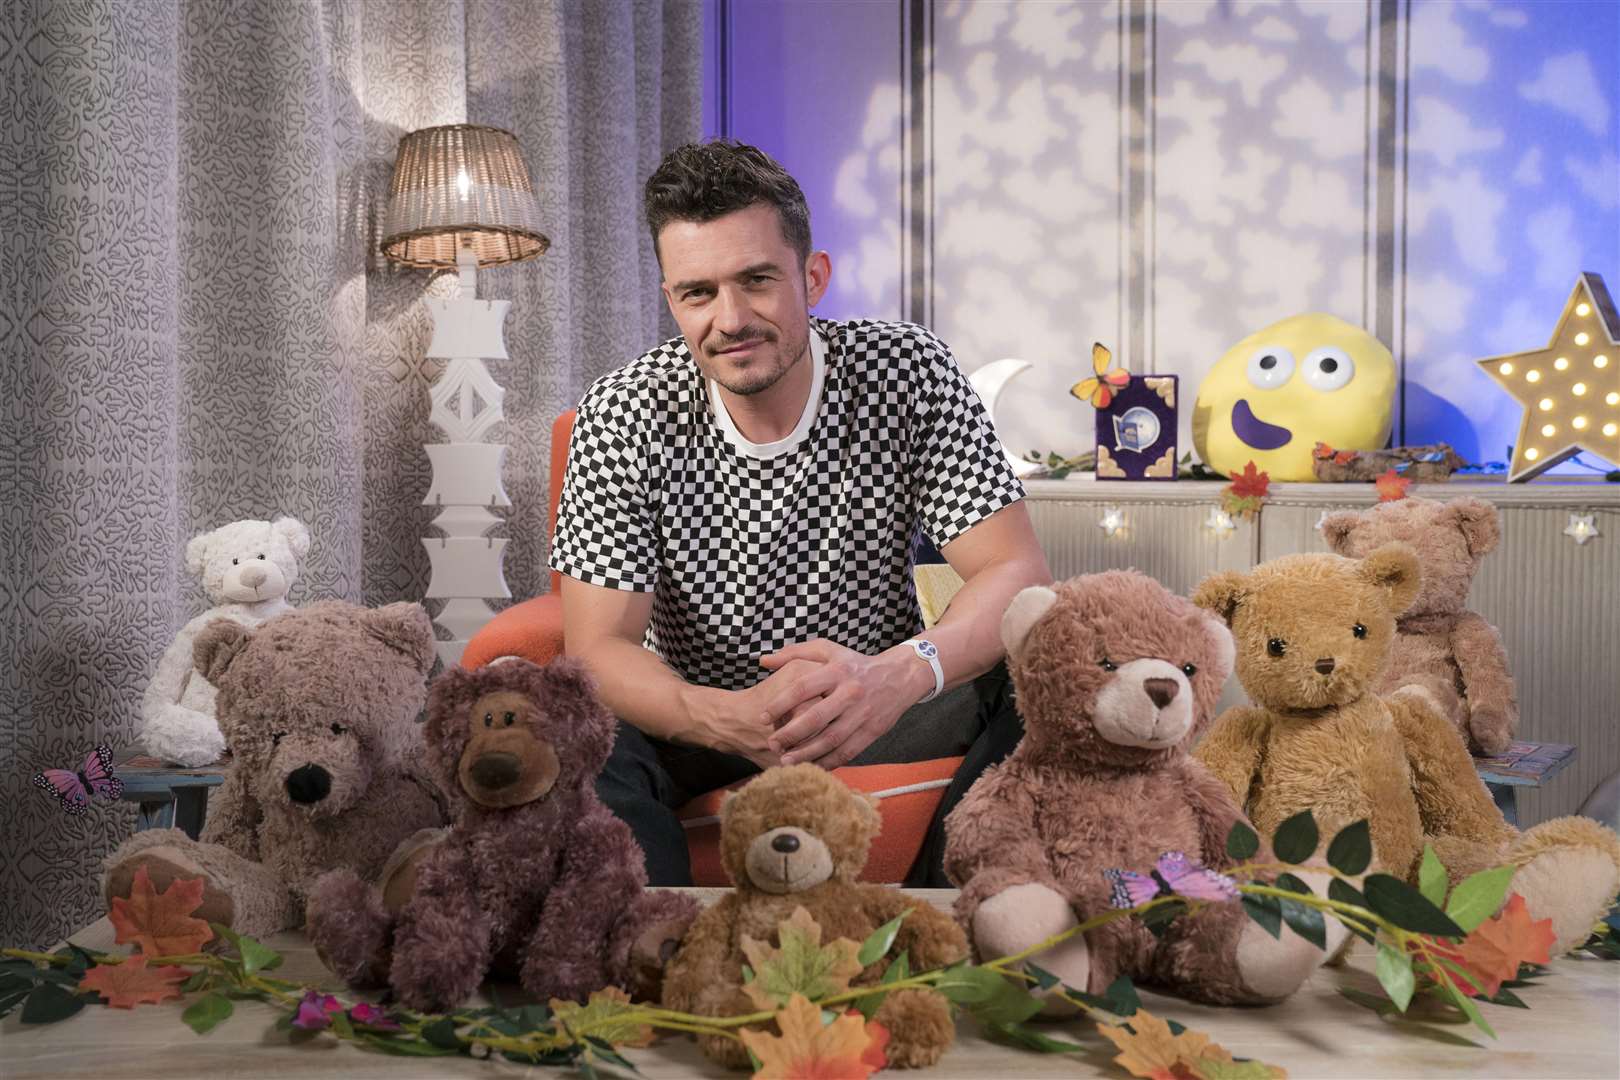 Orlando Bloom read the bedtime story in 2018